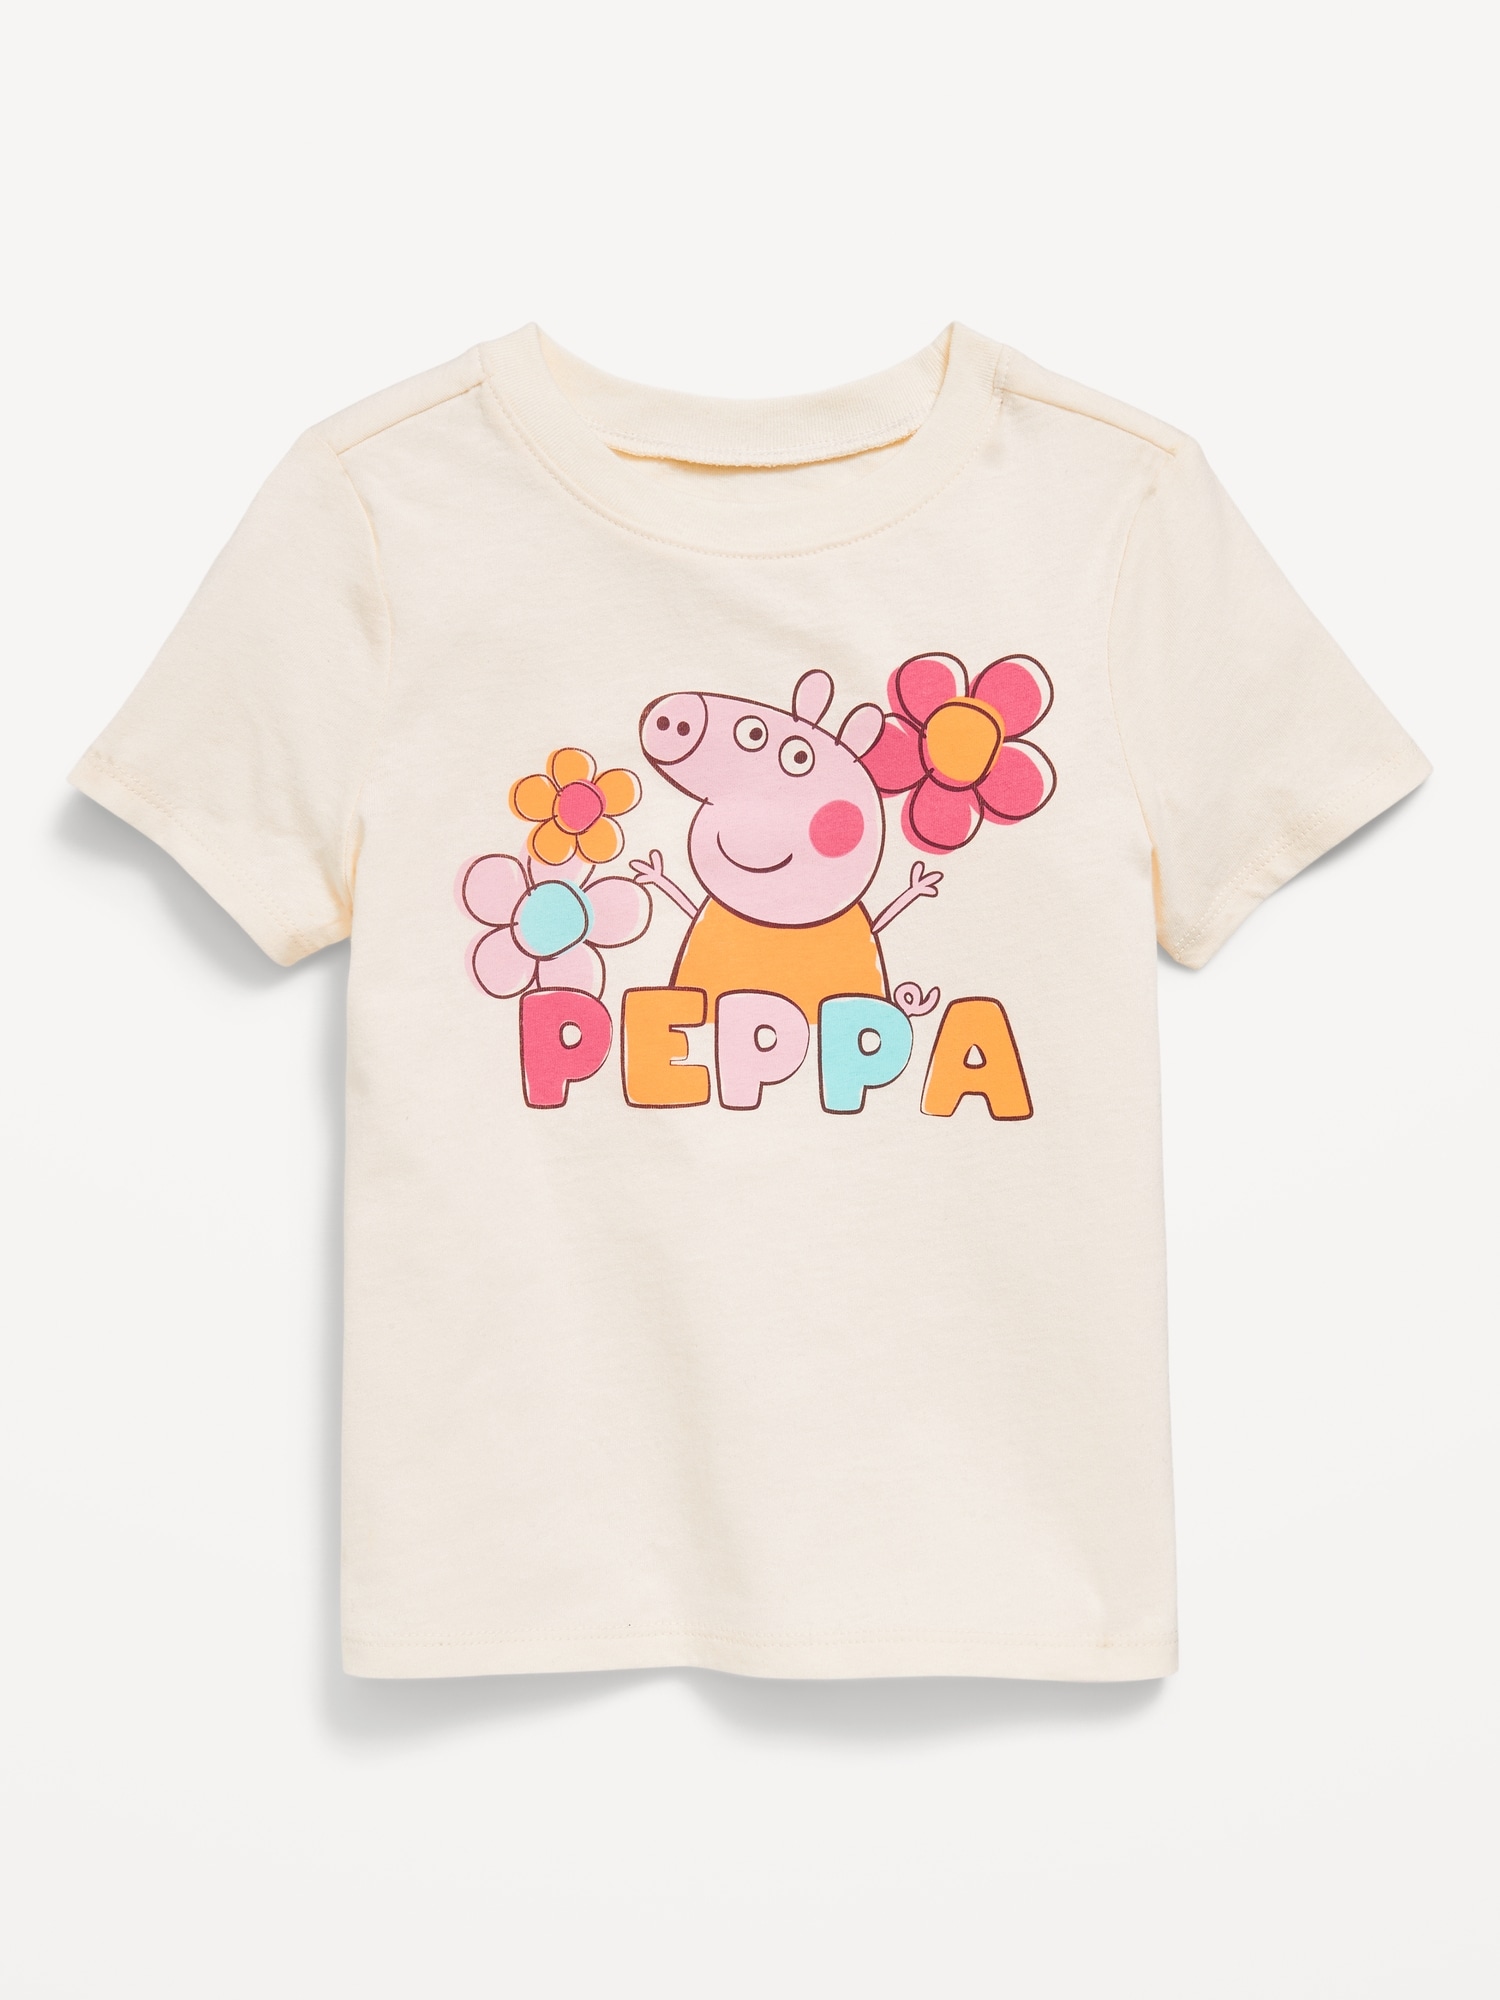 Peppa Pig Graphic T-Shirt for Toddler Girls